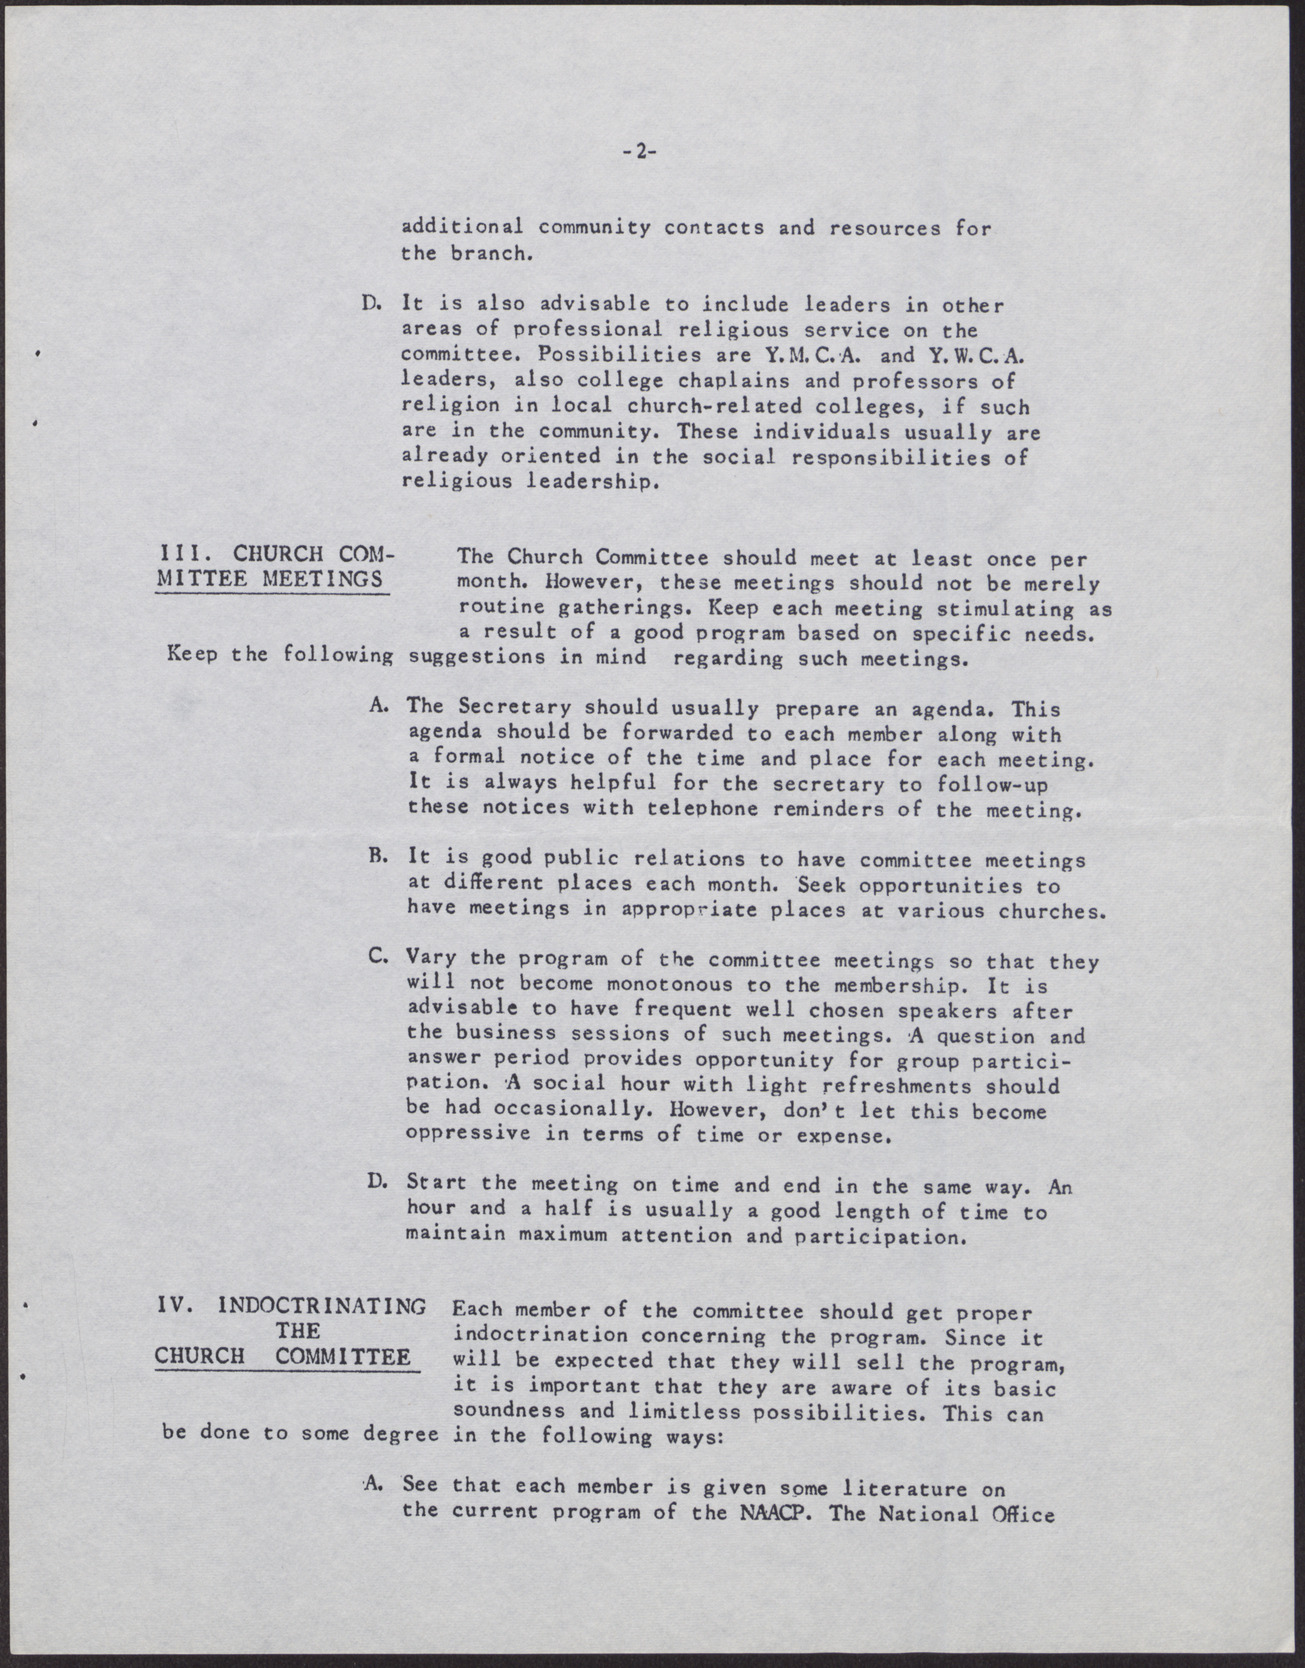 Program Suggestions for Branch Church Committees of the National Association for the Advancement of Colored People (9 pages), no date, page 5